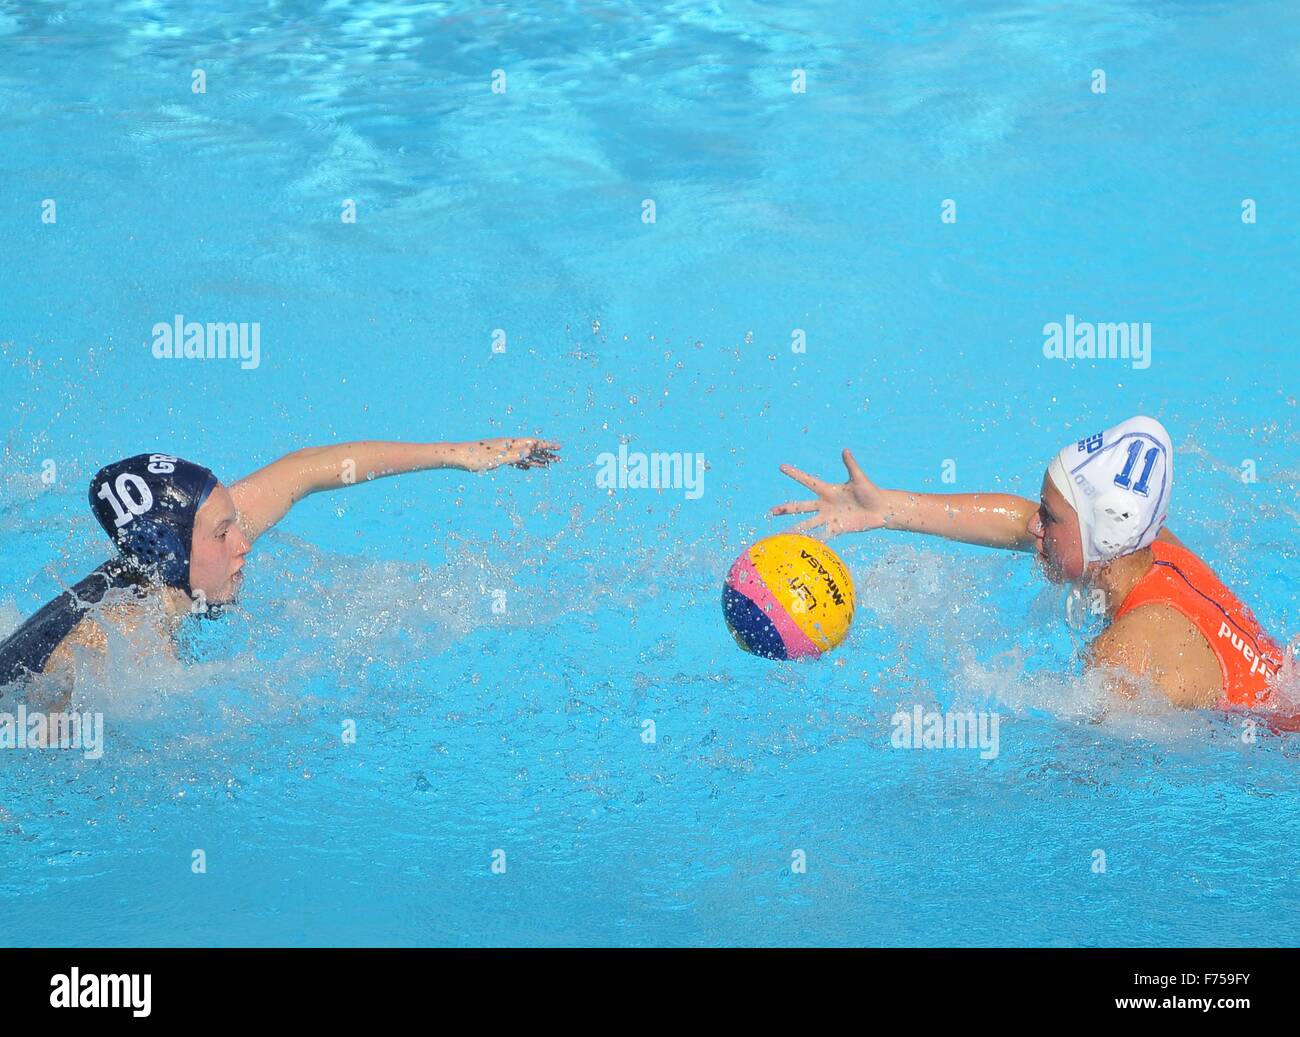 Katherine Rogers (GBR) and Anouk Bergsma (NED) race for the ball. Holland (NED) v Great Britain (GBR). Womens Water Polo. Water Polo Area. Baku. Azerbaijan. Baku2015. 1st European Games. 14/06/2015. Stock Photo